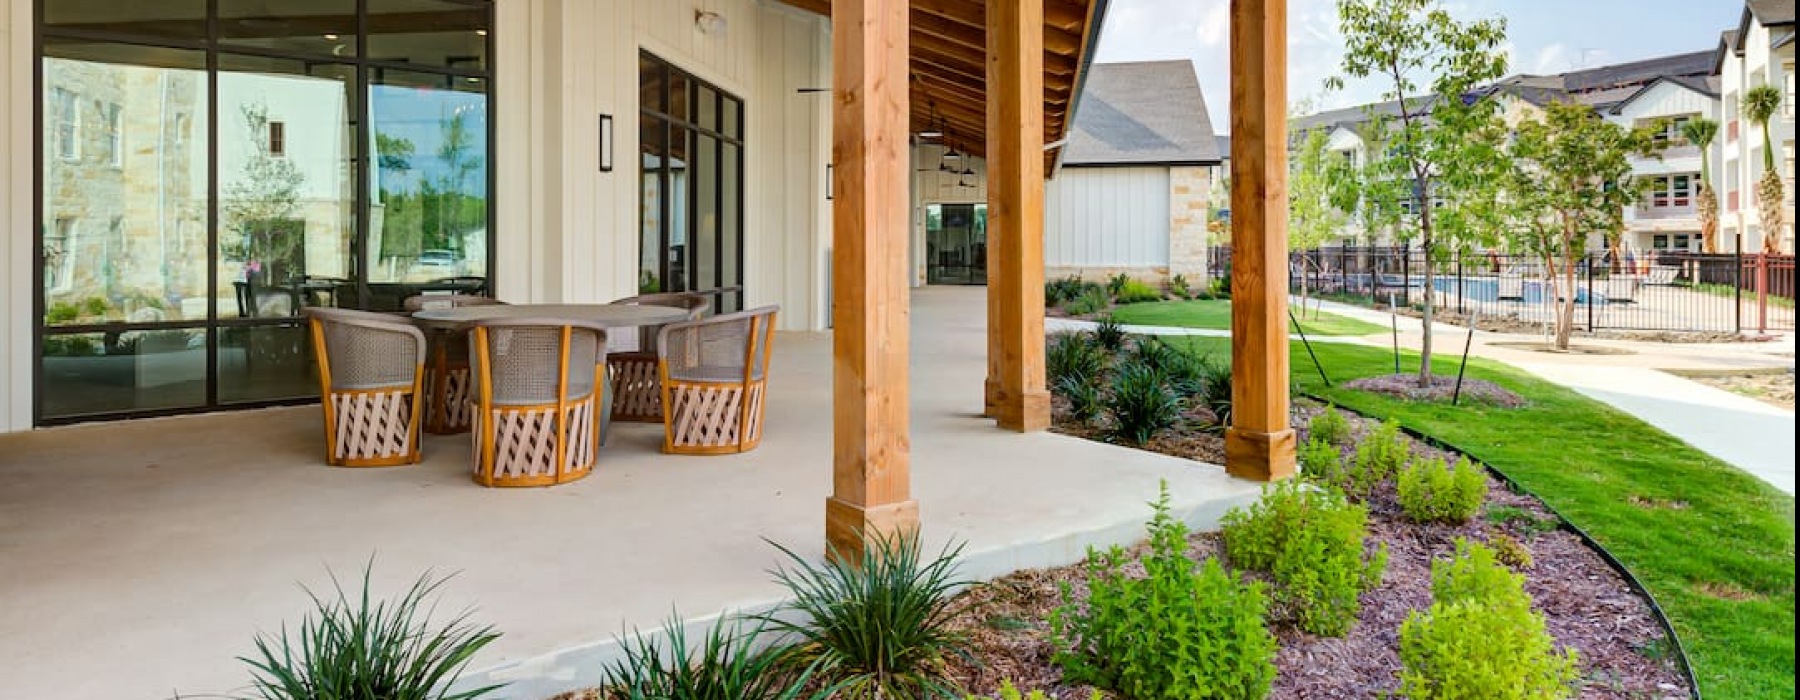 spacious outdoor patio of property including chairs and nature